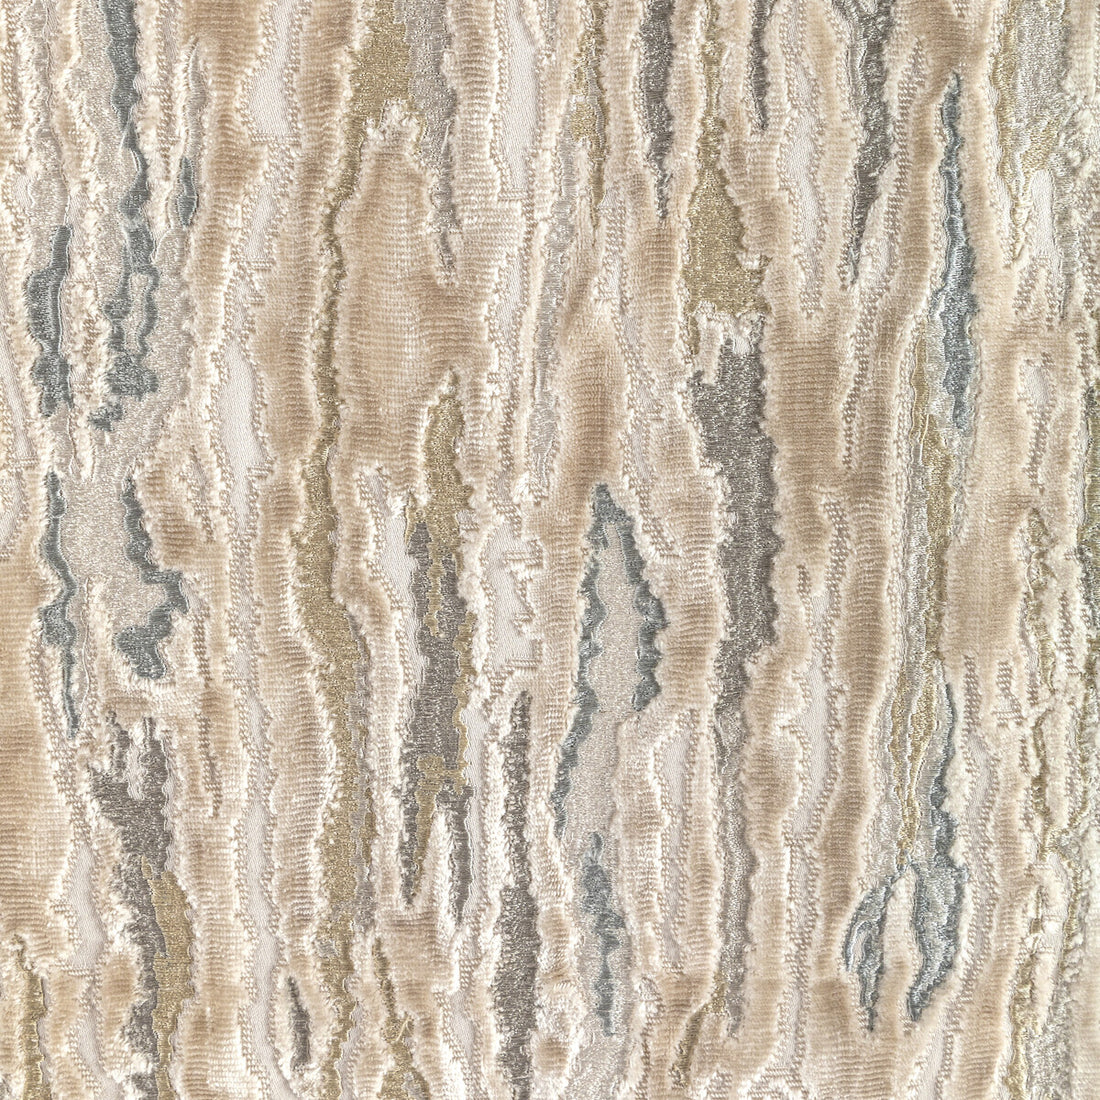 Velvet Waves fabric in cream color - pattern 36322.16.0 - by Kravet Couture in the Modern Luxe III collection